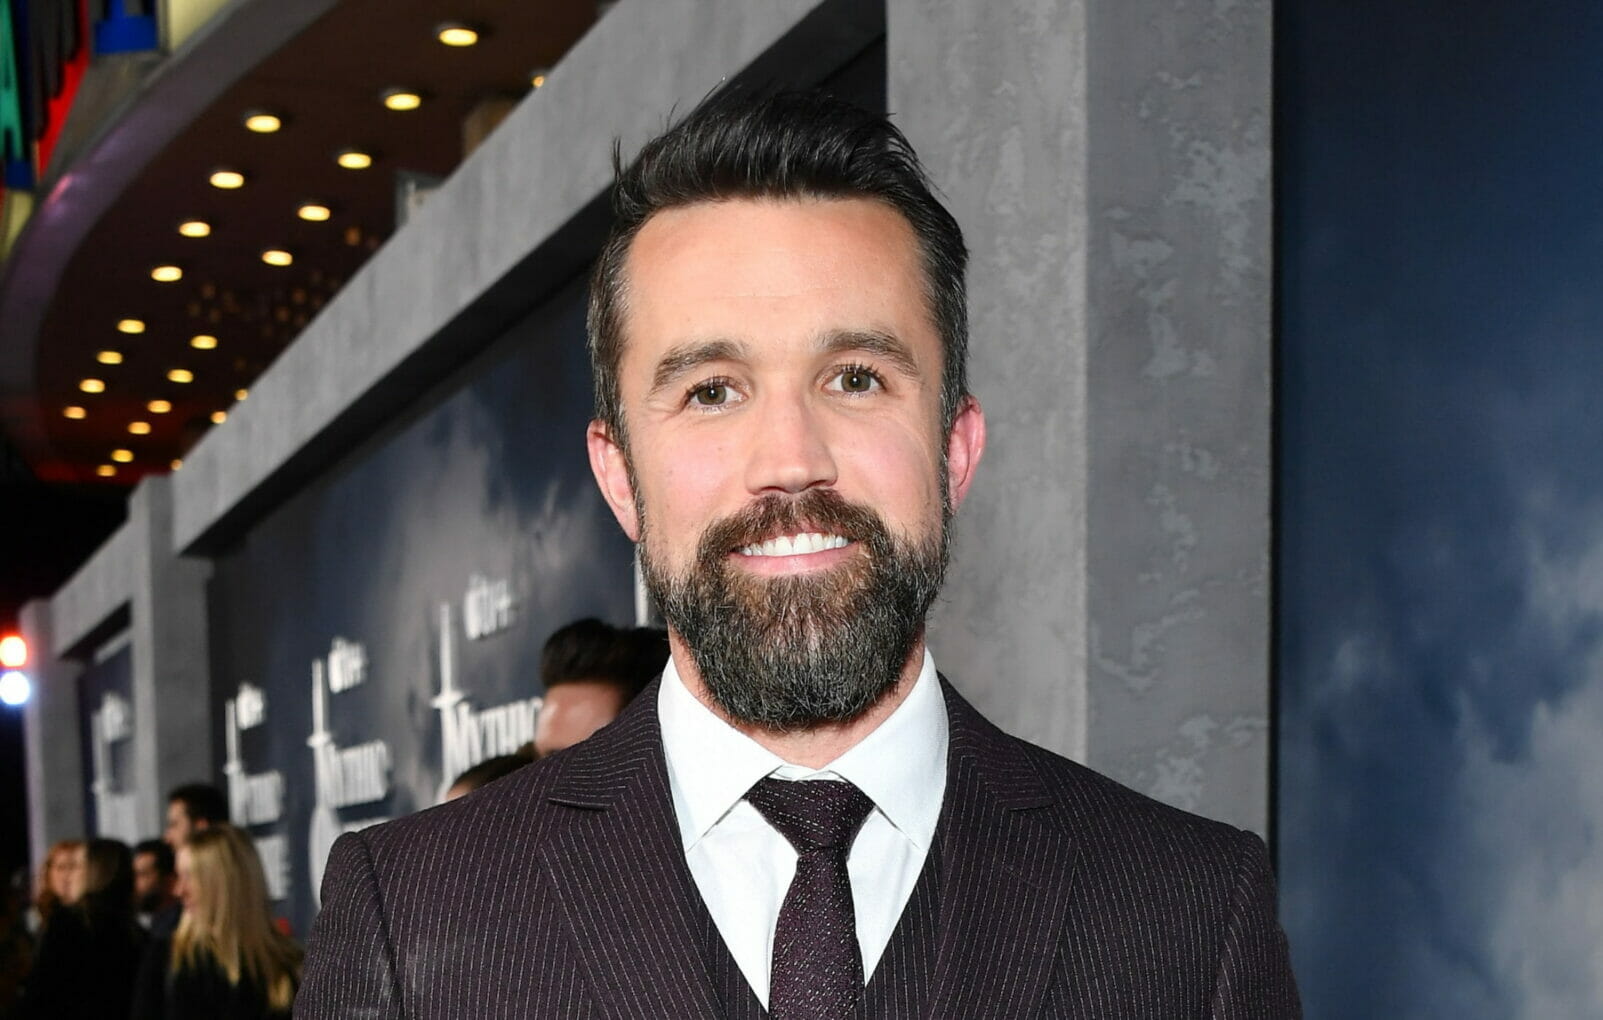 Rob Mcelhenney net worth, age, wiki, family, biography and latest